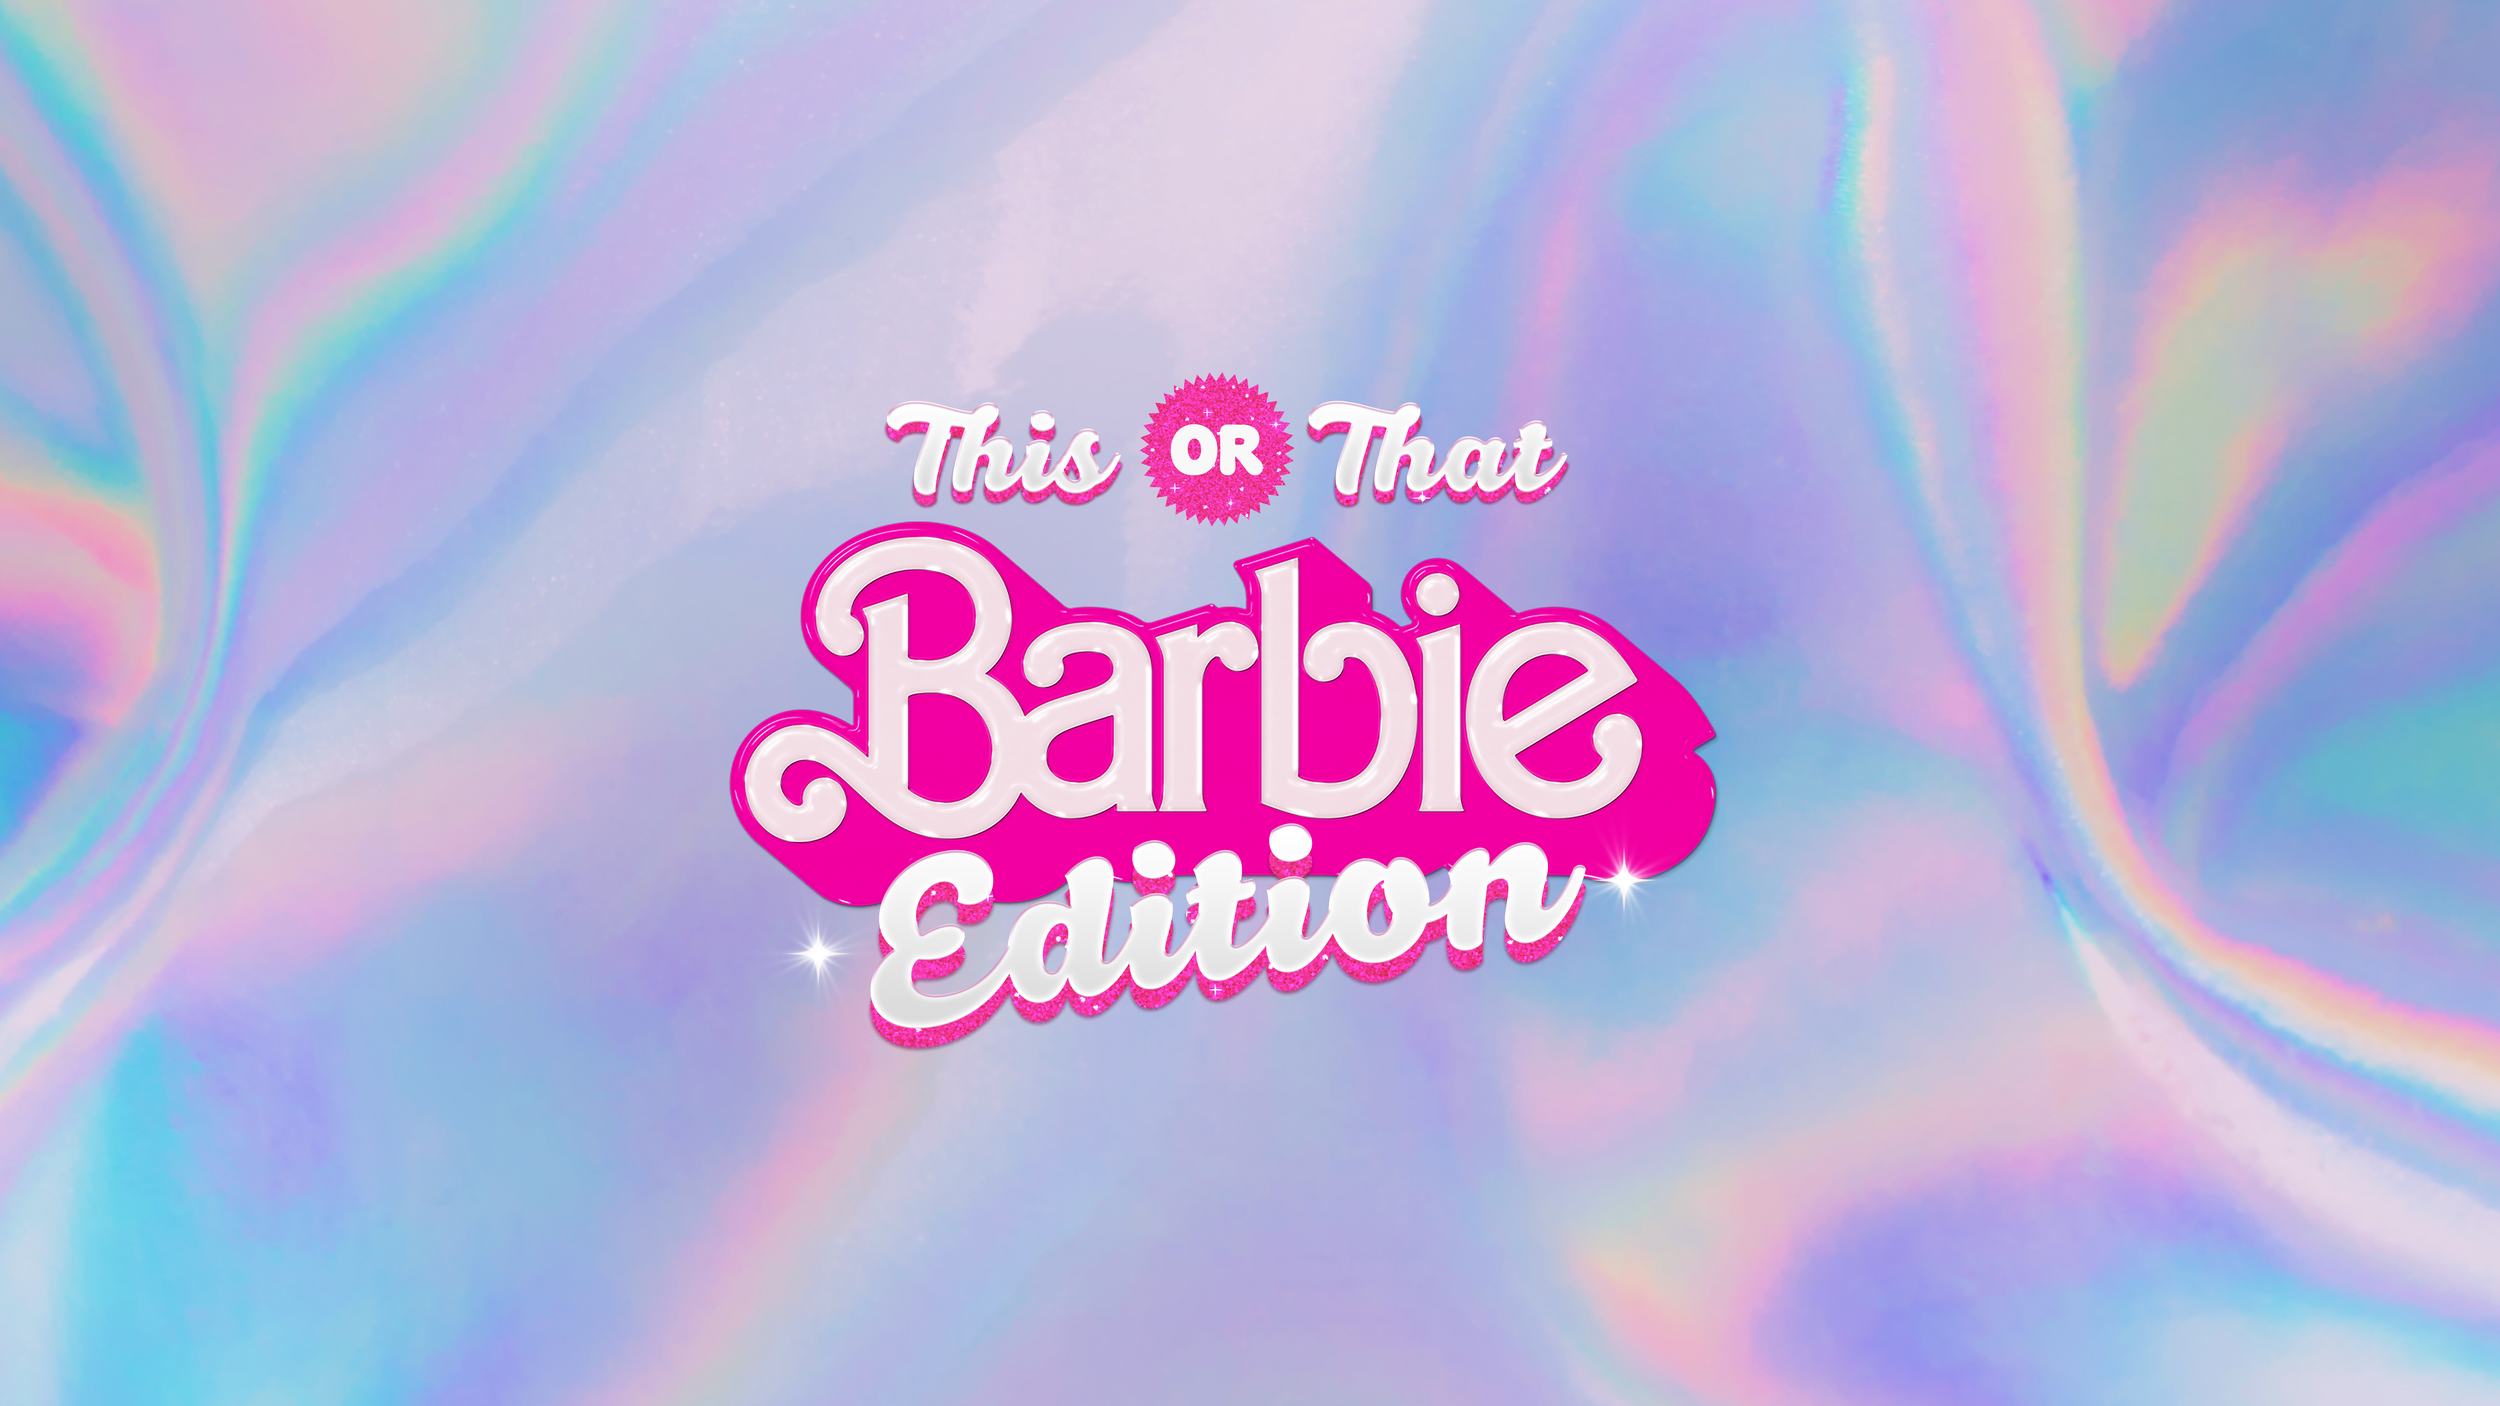 Brand-Barbie-This or That-GFX-TITLE CARD-OPTION 1-v7.png